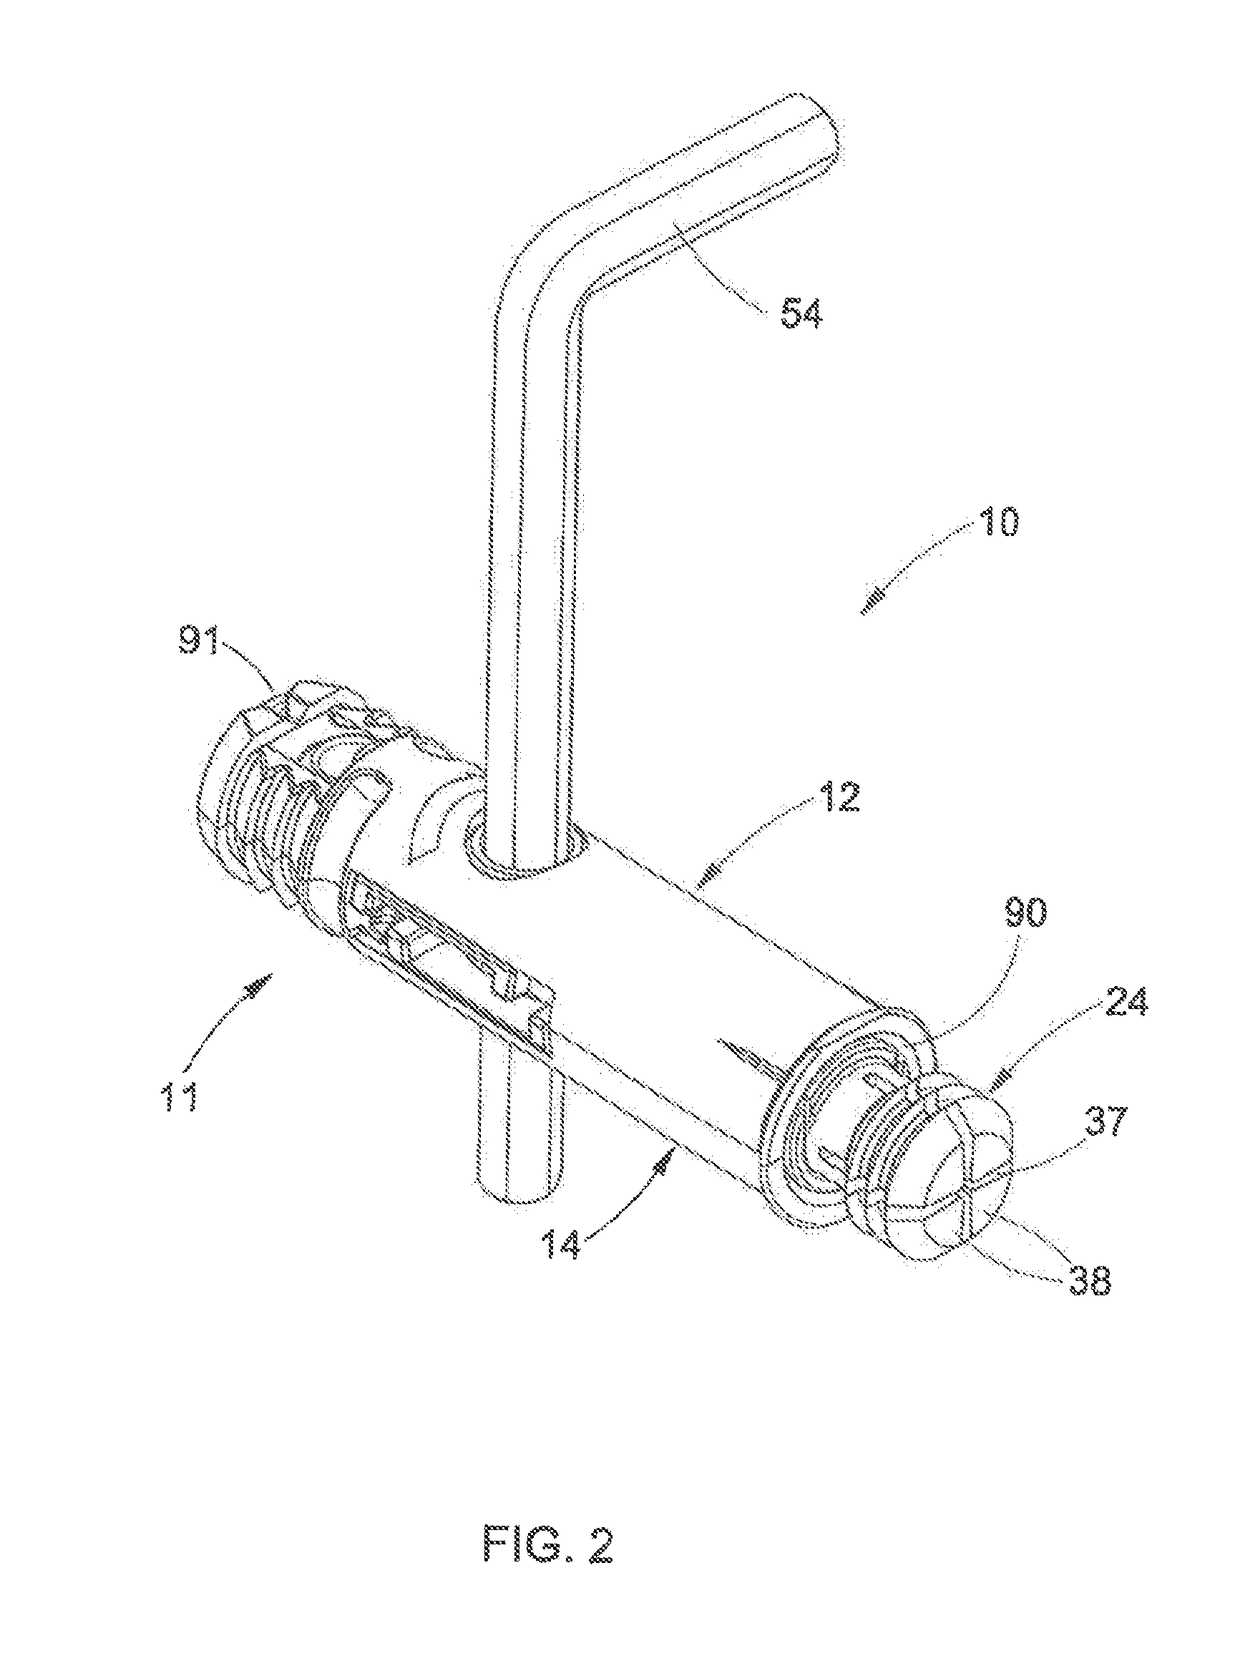 Device for joining parts of furniture and furnishing accessories